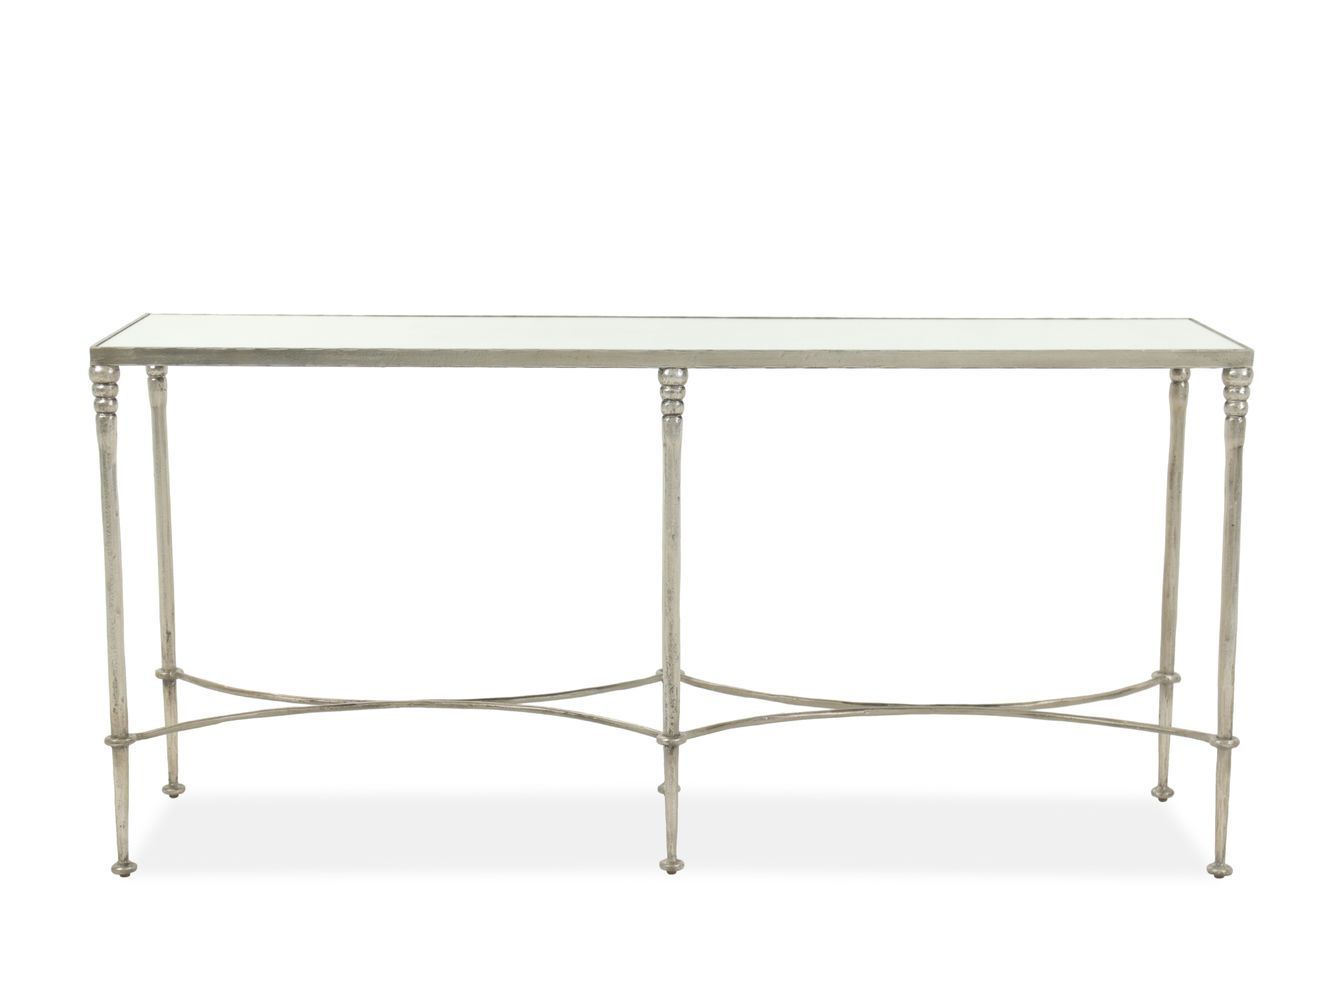 Antiqued Glass Top Casual Console Table In Silver Throughout Antique Silver Aluminum Console Tables (View 14 of 20)